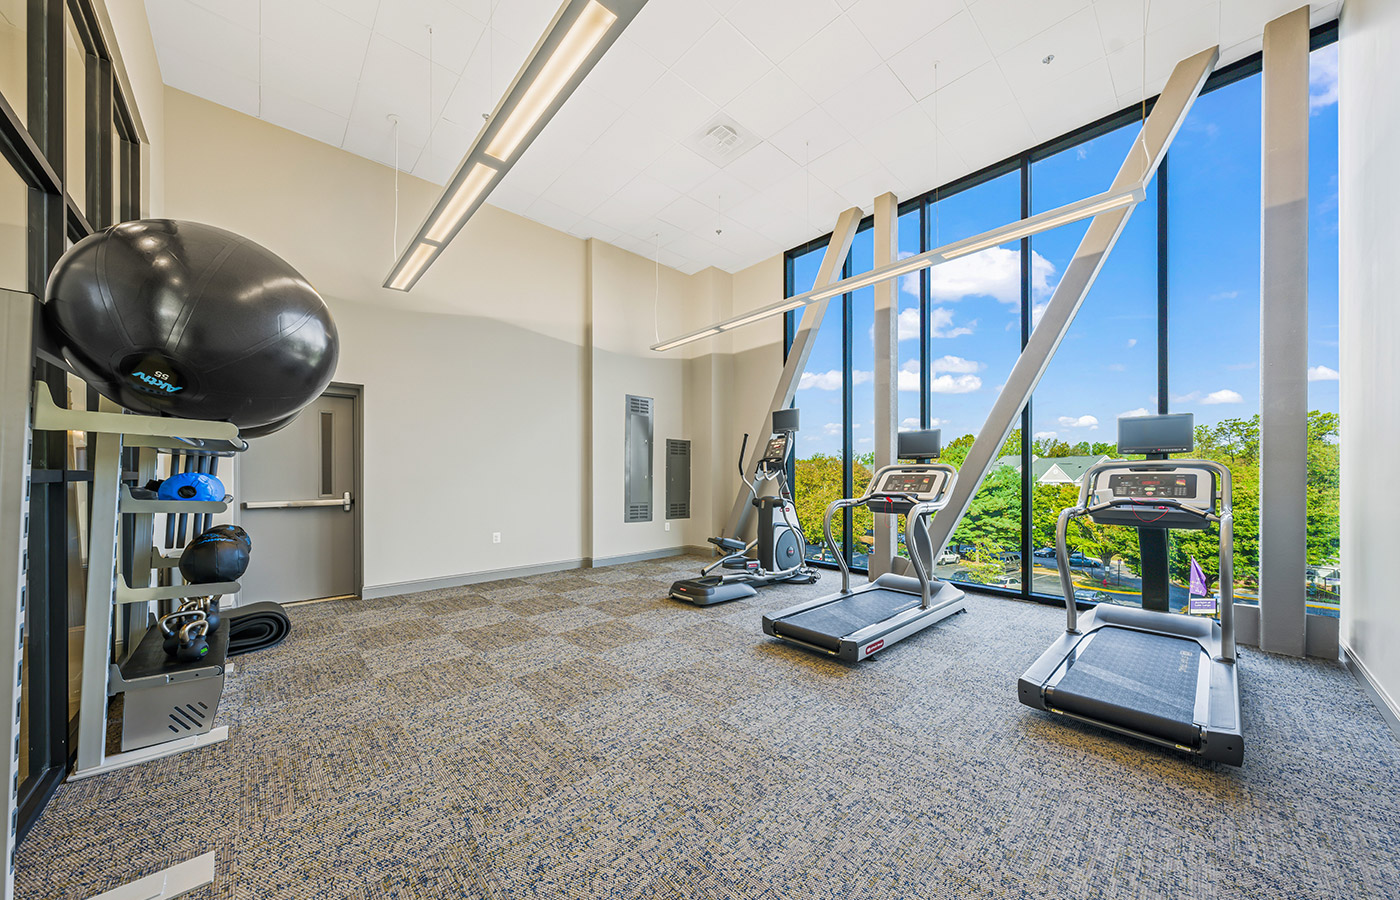 The fitness center at The Skybridge at Town Center.